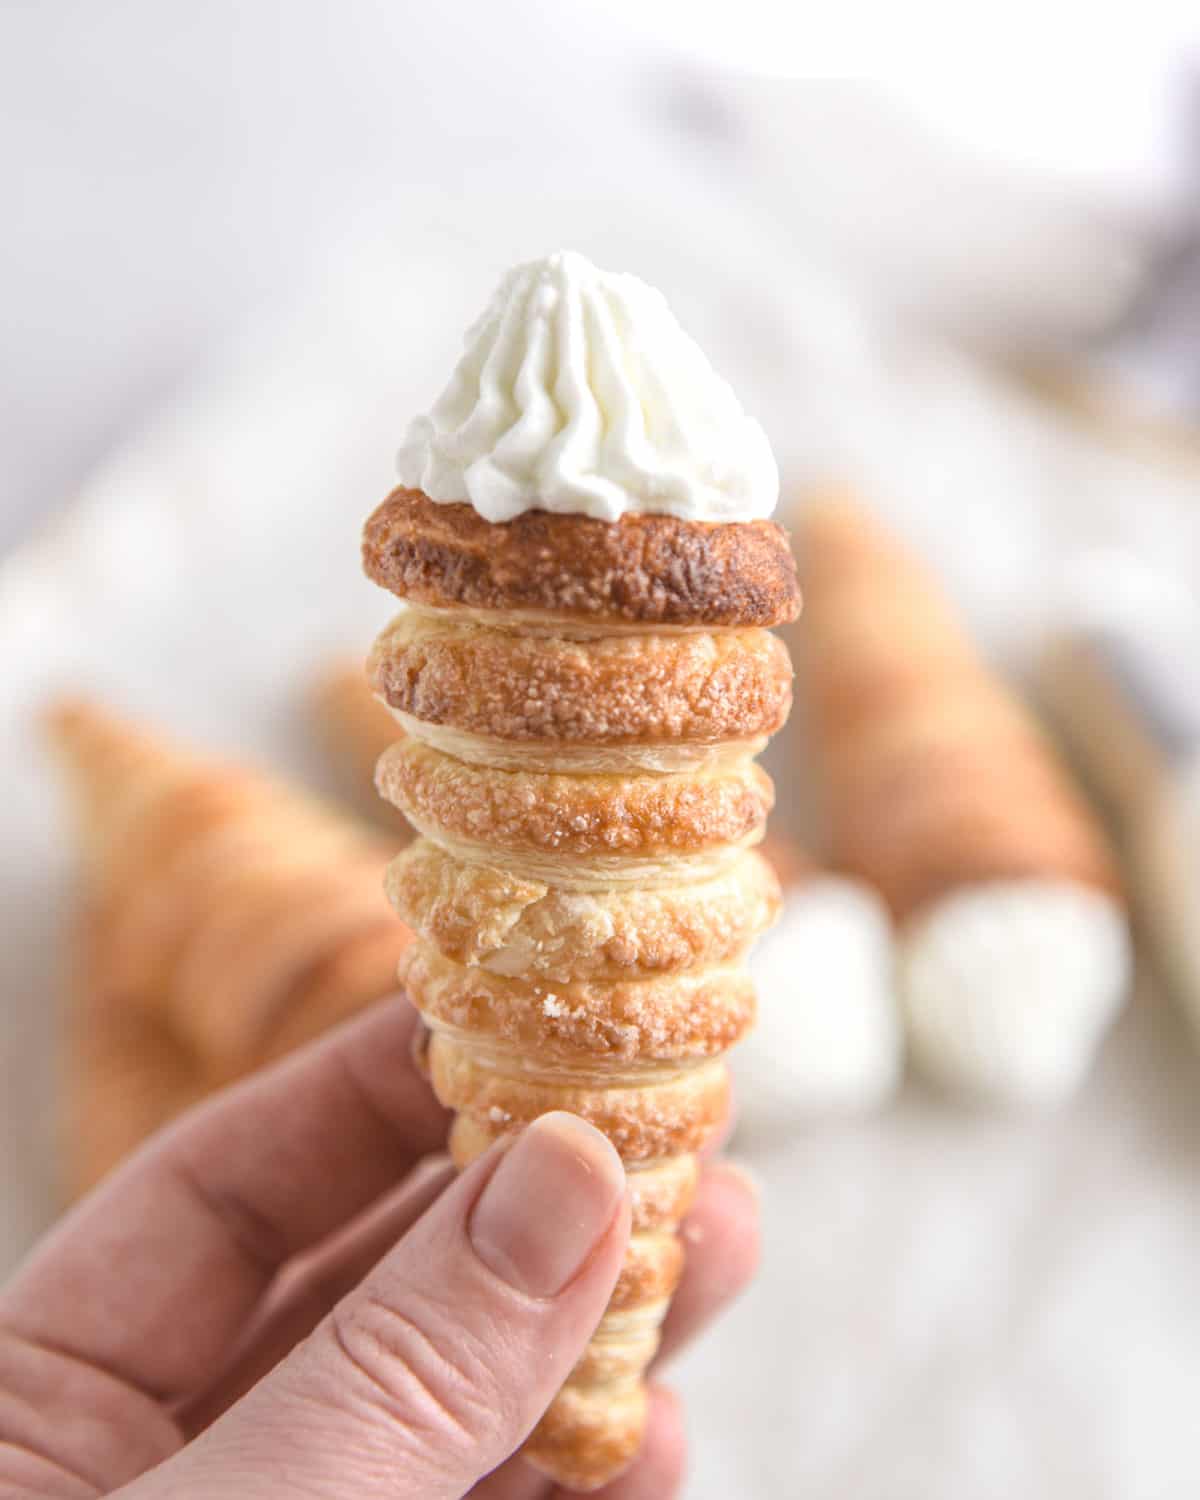 A close up of a hand holding a single cream horn.